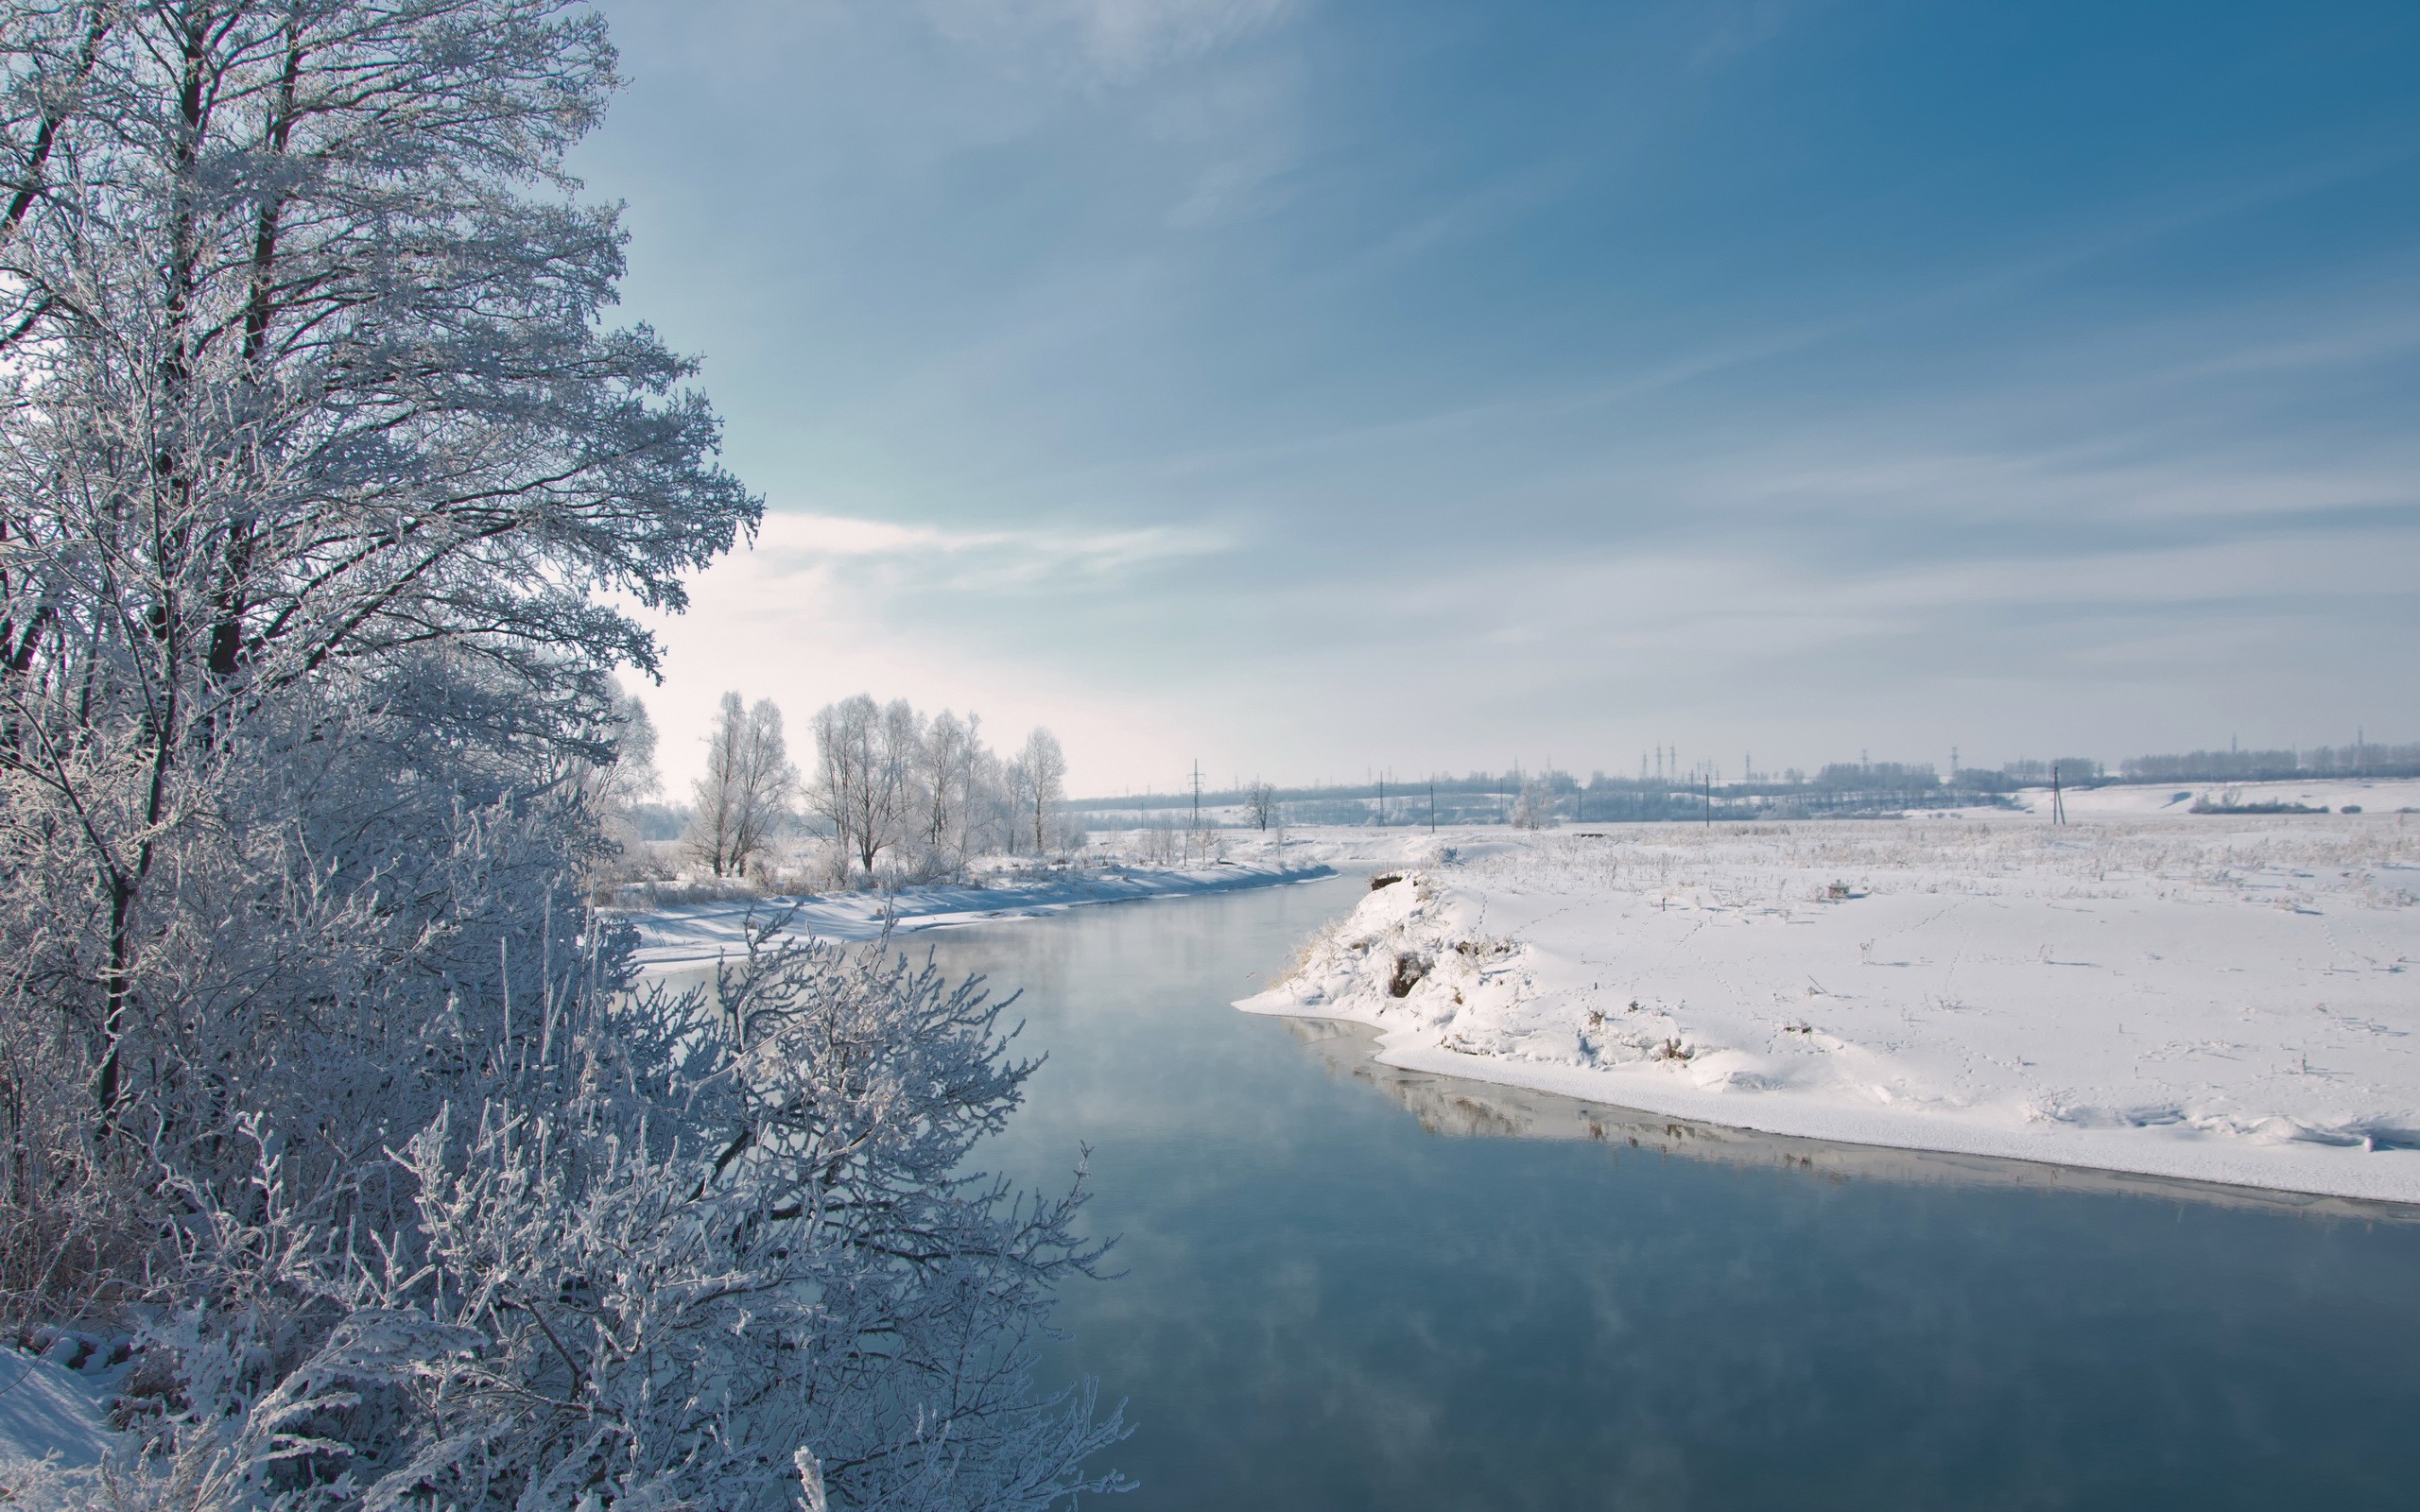 General 2560x1600 river water winter cold ice snow outdoors landscape